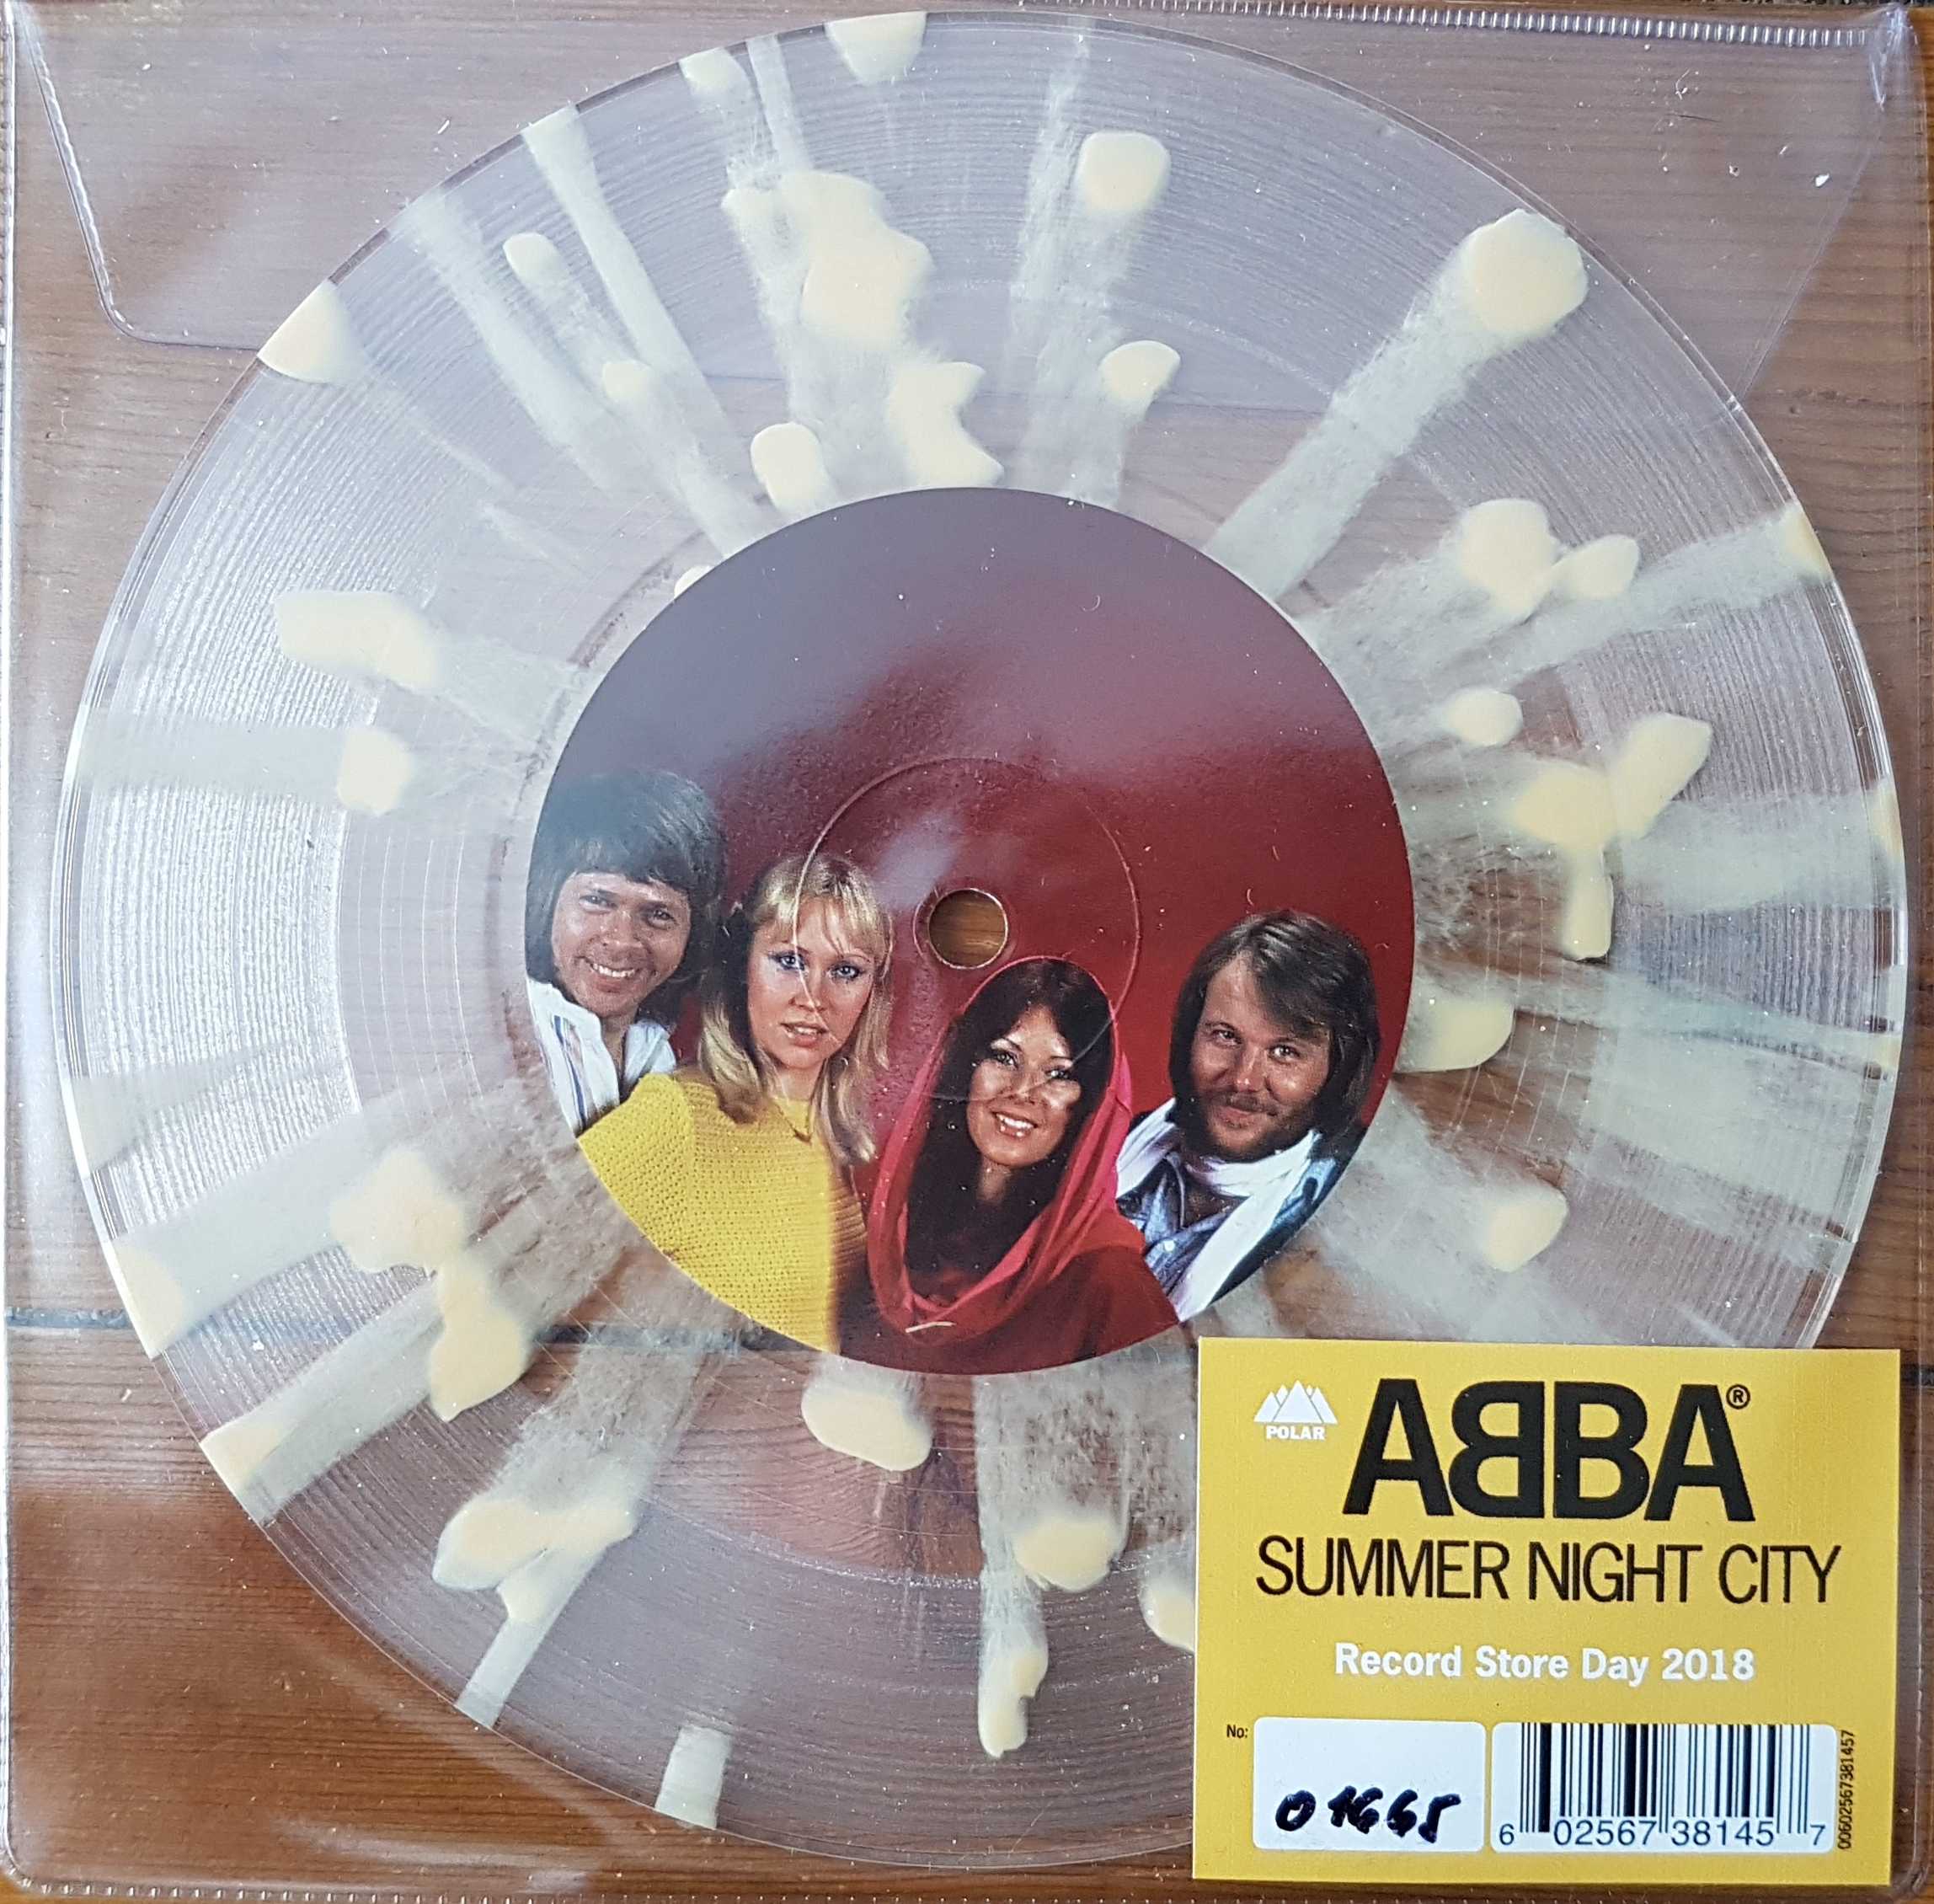 Picture of LC 00309 Summer night city - Limited coloured vinyl - Record Store Day 2018 by artist Abba  